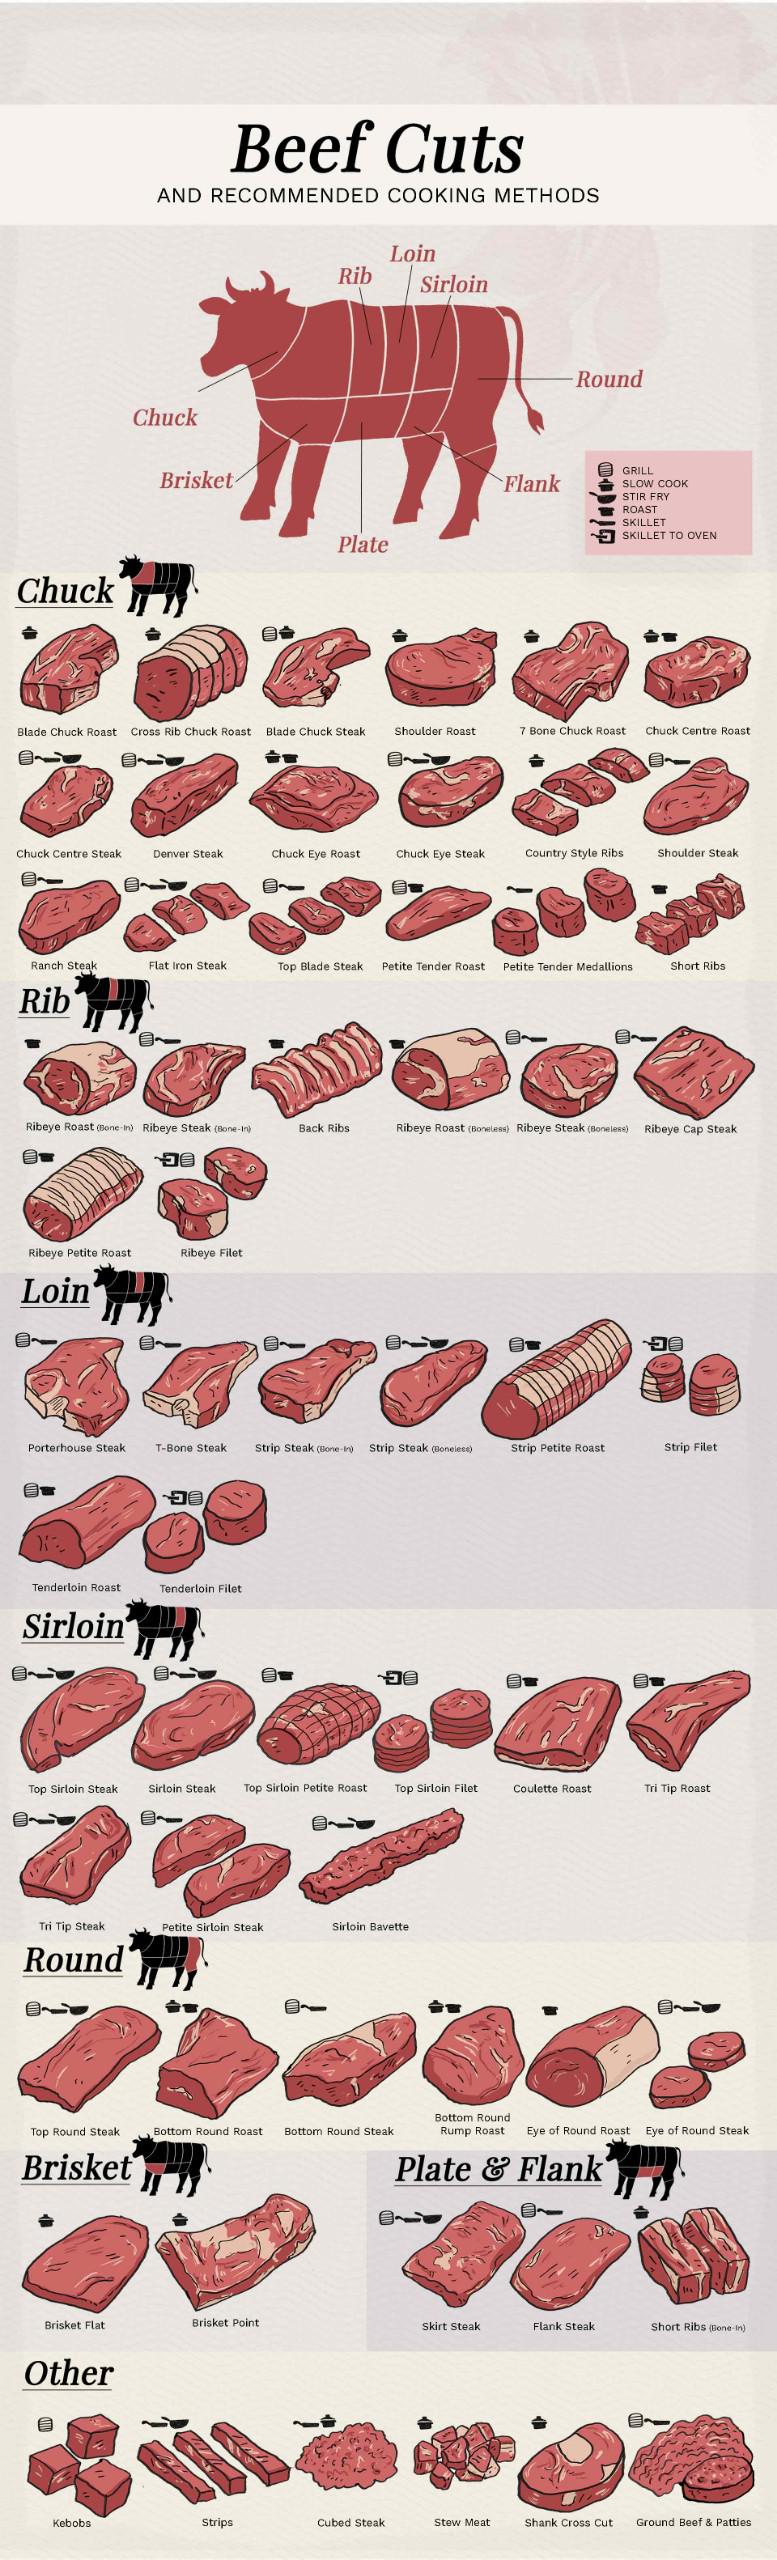 Beef Cooking Guide: Know Your Cuts and Their Best Cooking Methods